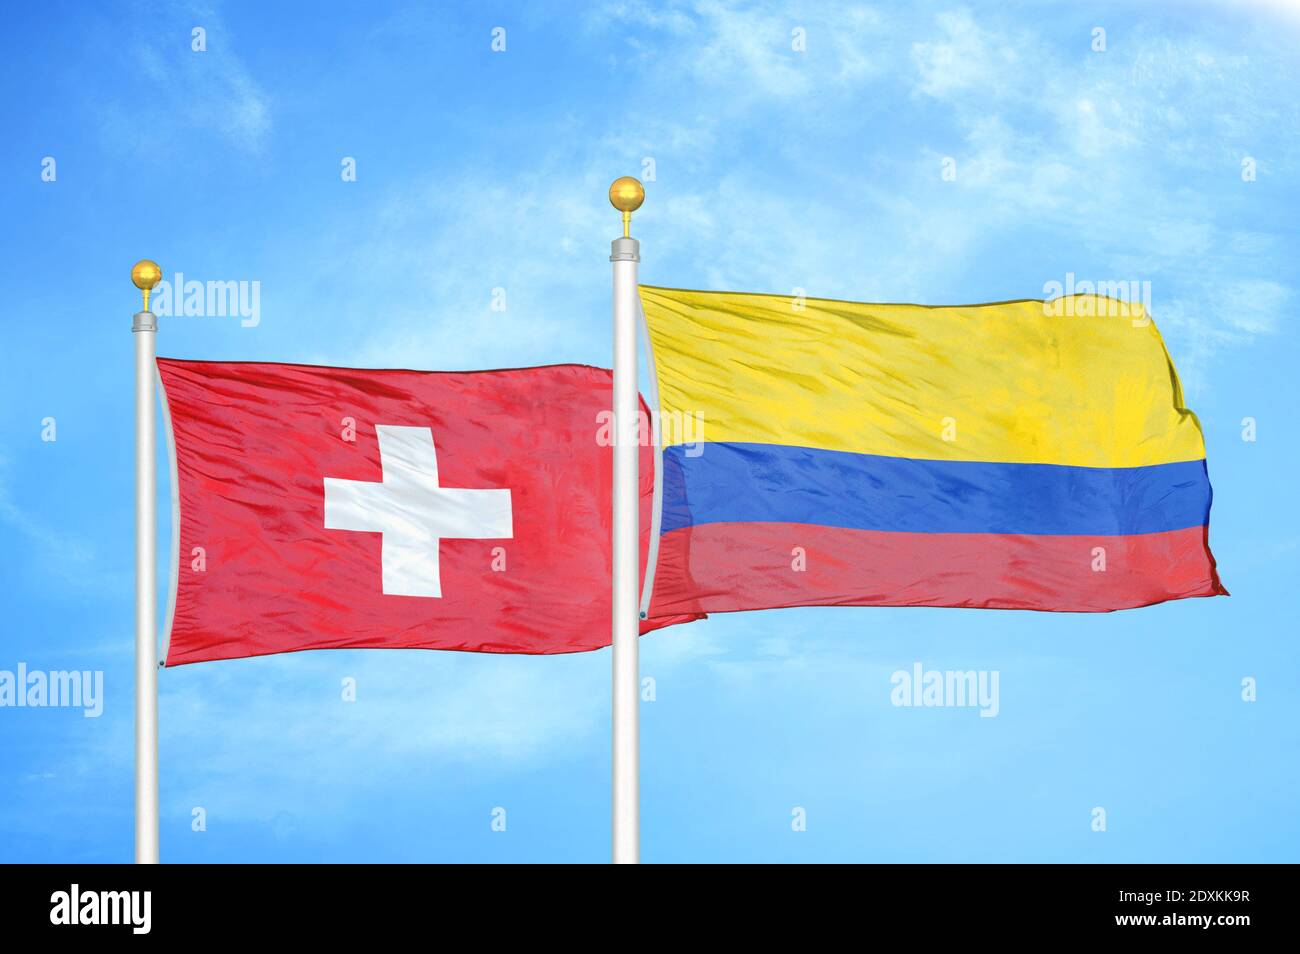 Switzerland and Colombia two flags on flagpoles and blue sky Stock Photo